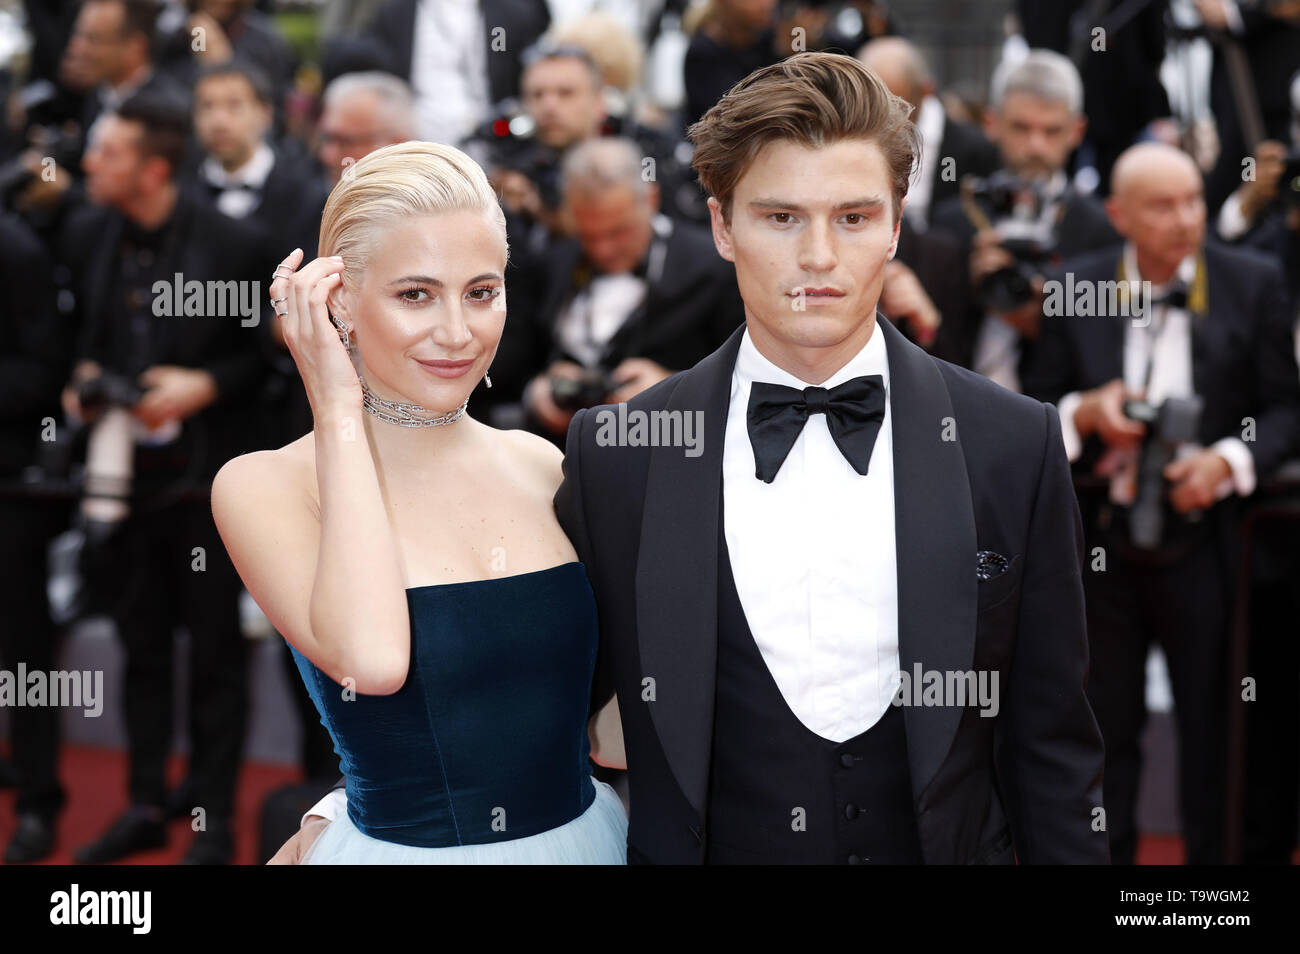 Cannes, Frankreich. 20th May, 2019. Pixie Lott and Oliver Cheshir attending the 'La belle époque' premiere during the 72nd Cannes Film Festival at the Palais des Festivals on May 20, 2019 in Cannes, France | Verwendung weltweit Credit: dpa/Alamy Live News Stock Photo